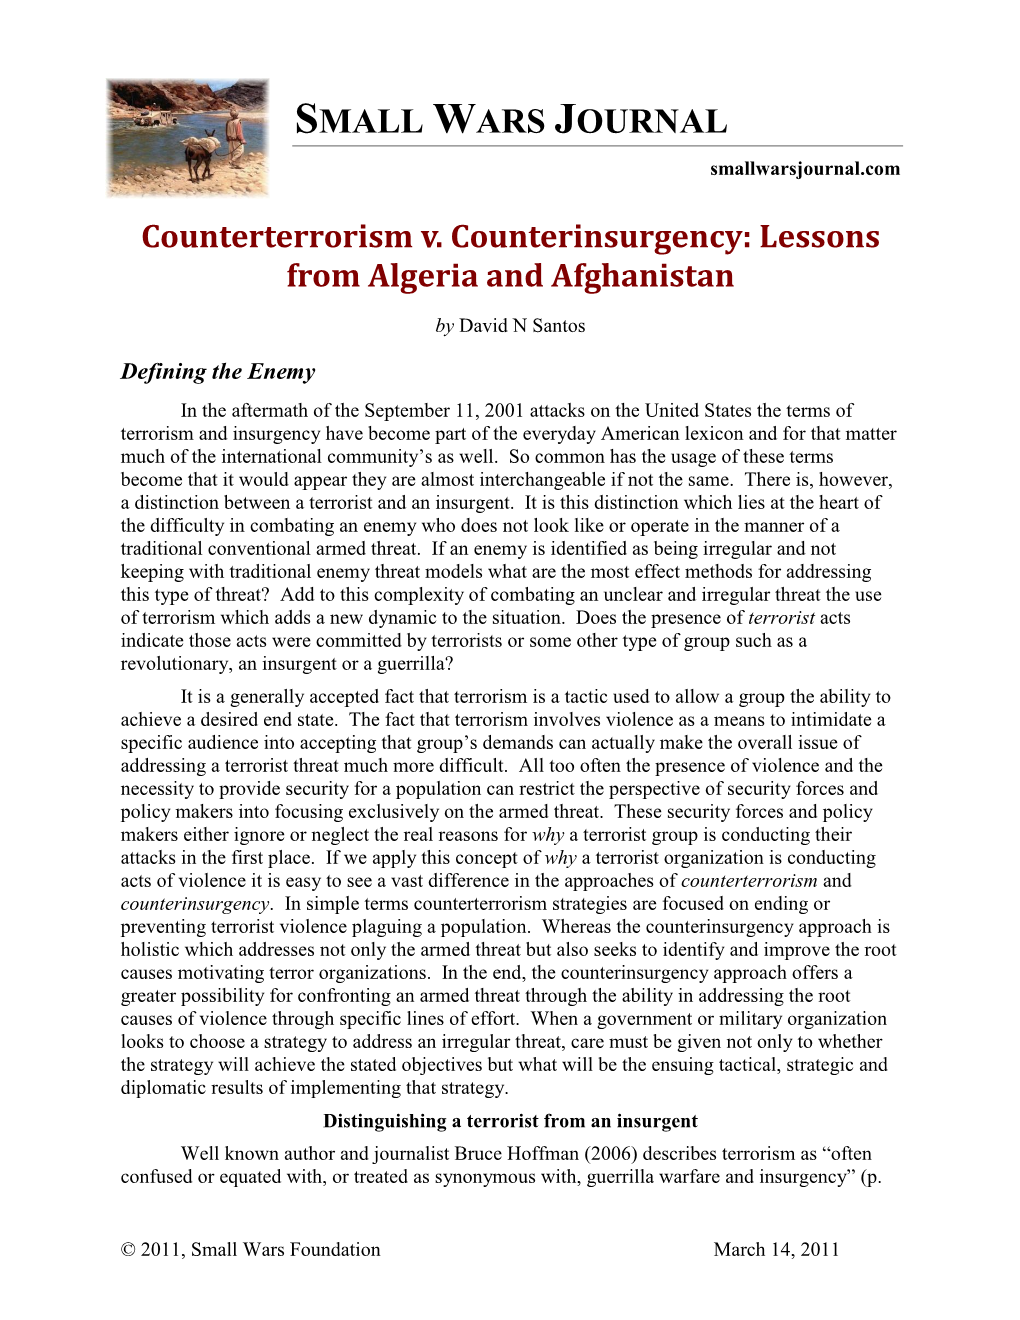 Counterterrorism V. Counterinsurgency: Lessons from Algeria and Afghanistan